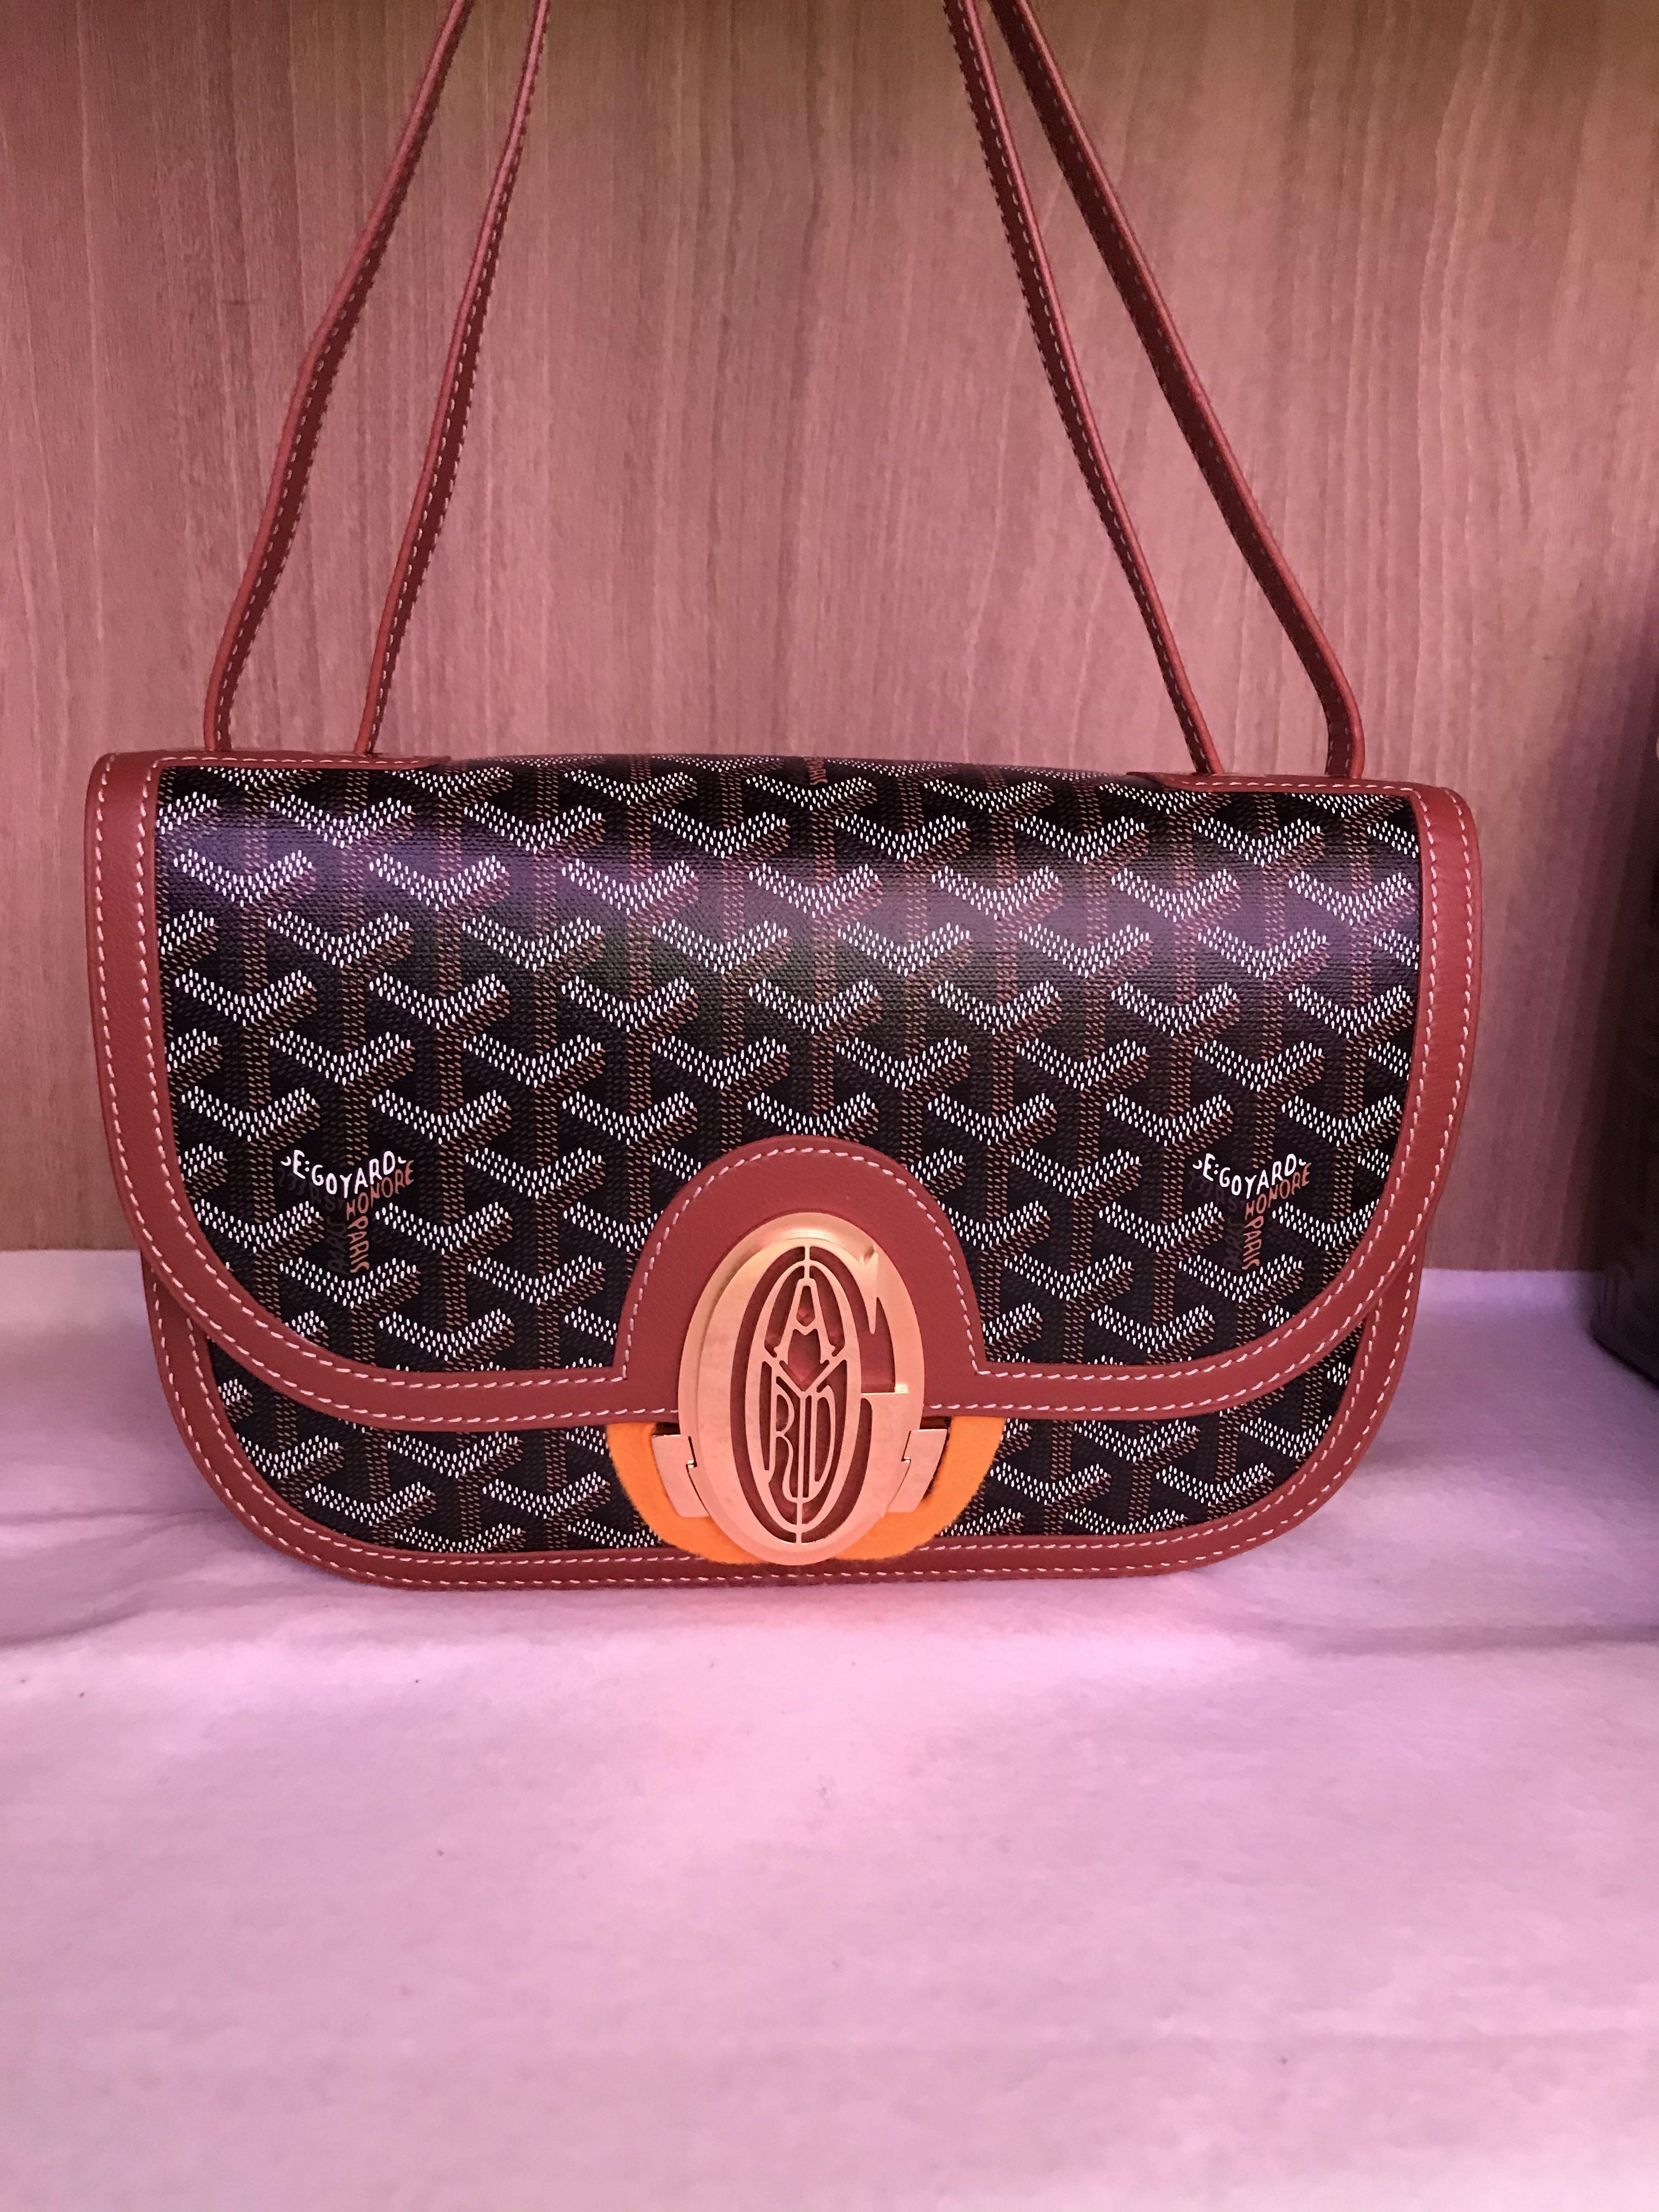 Goyard Anjou PM Unboxing Review - Bought in Singapore Trip